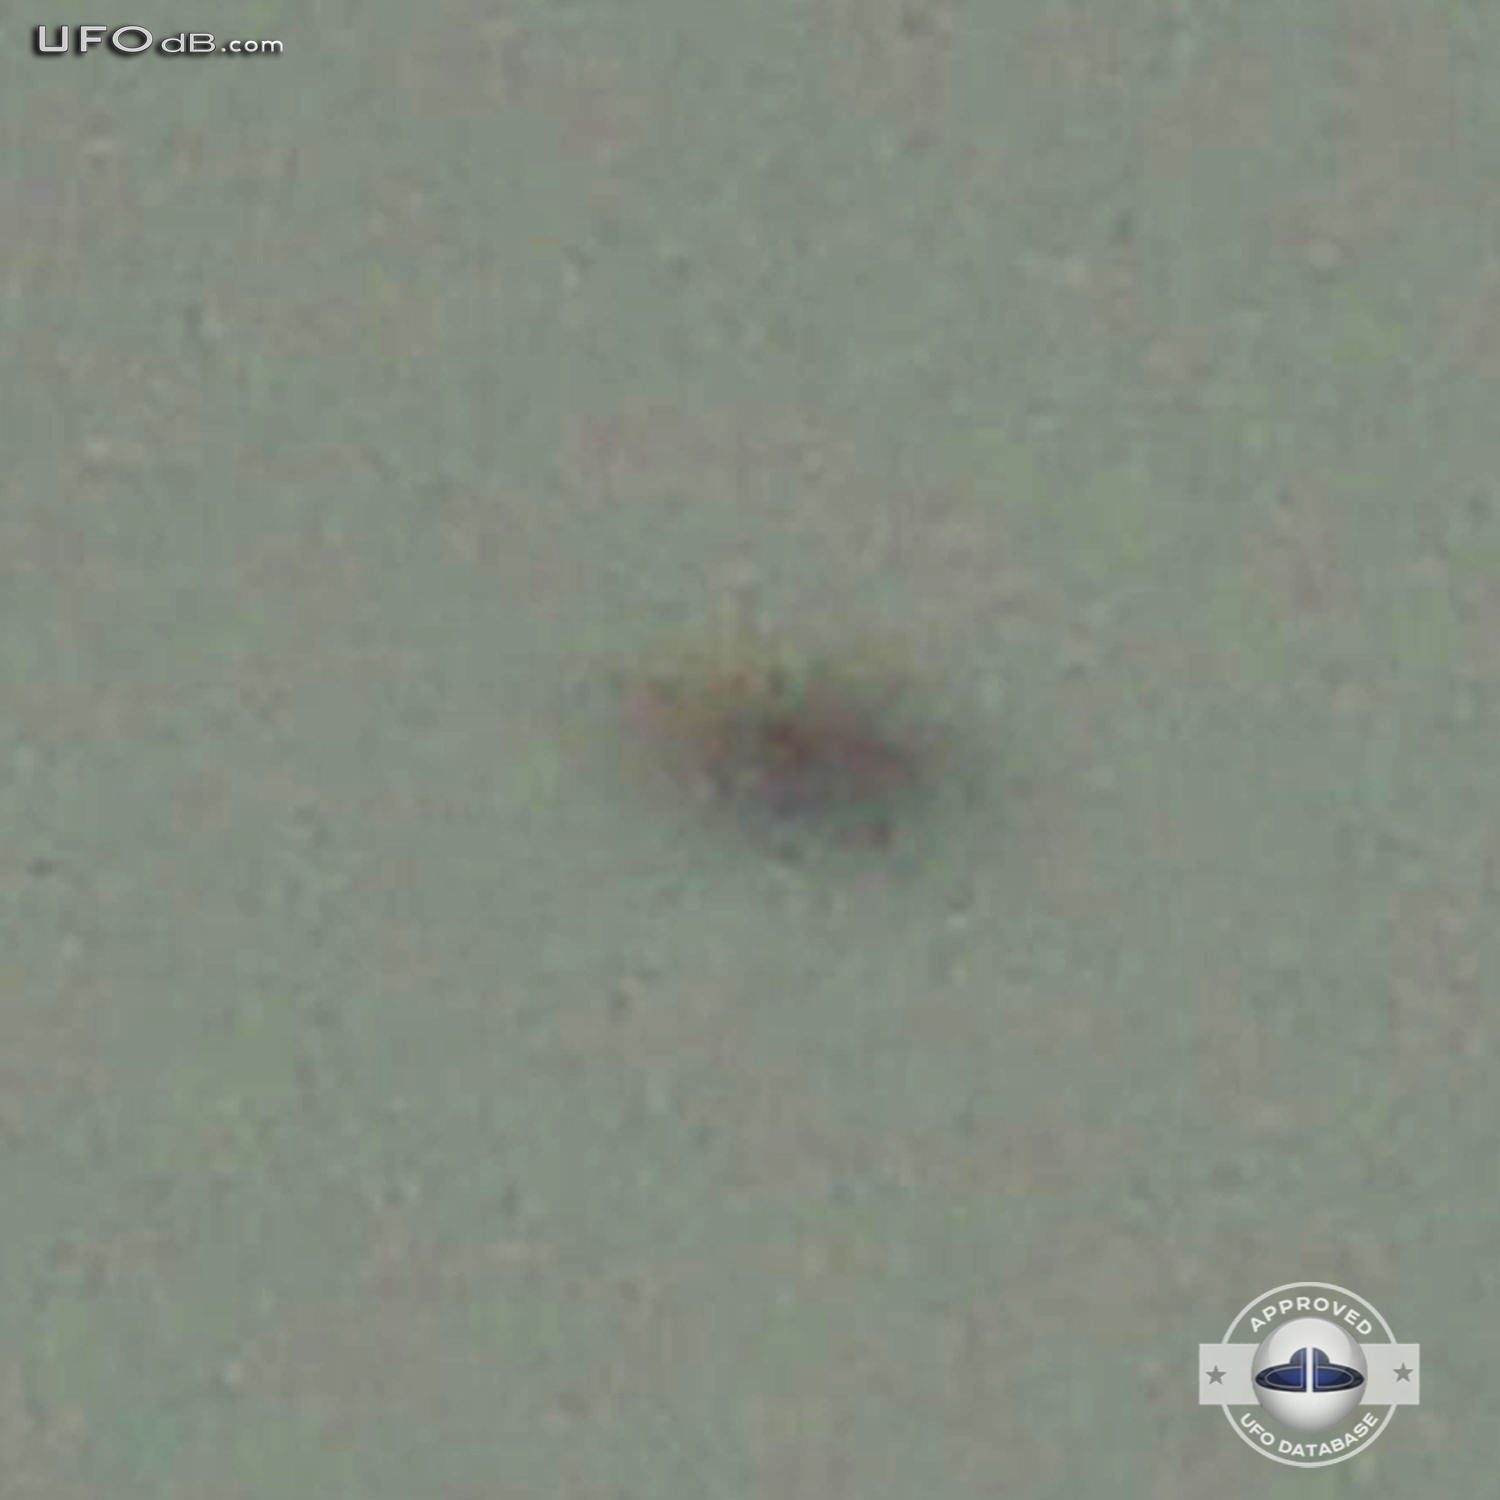 Witness near Maracaibo Airport takes a picture of a UFO near Airplane UFO Picture #351-4